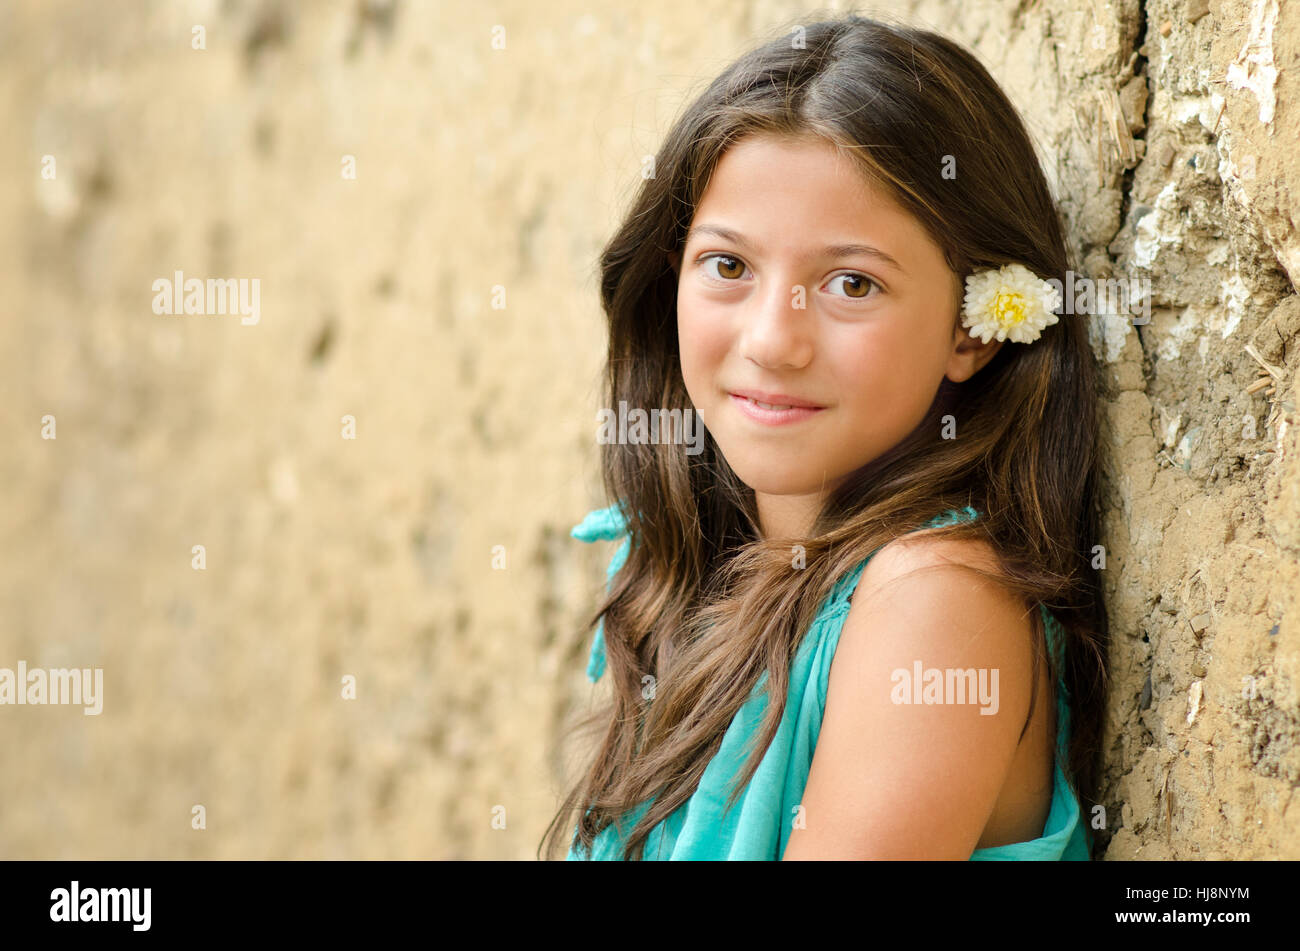 Portrait of a smiling girl with a flower in her hair Banque D'Images